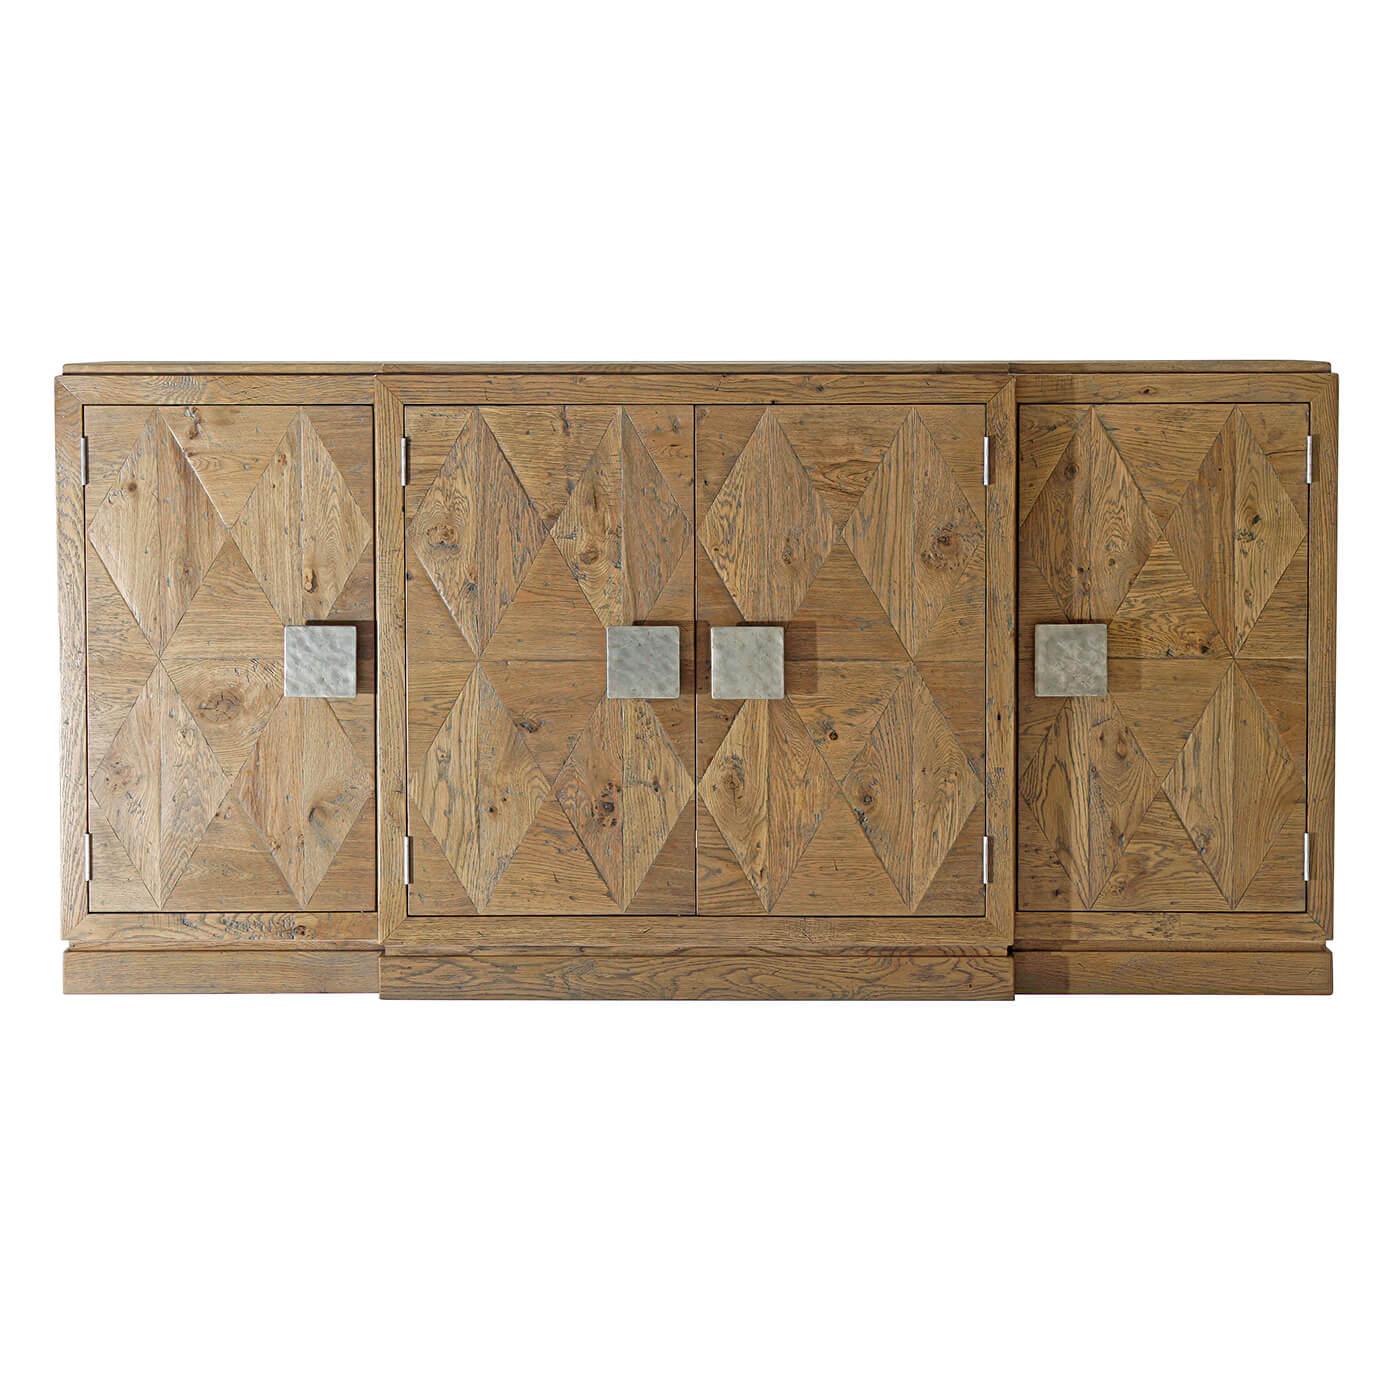 Italian Rustic Parquetry oak breakfront credenza with four doors having bold 'vintage' metal handles with three sections and interiors with adjustable shelves, the center section with a fixed drawer, and credenza raised on a plinth